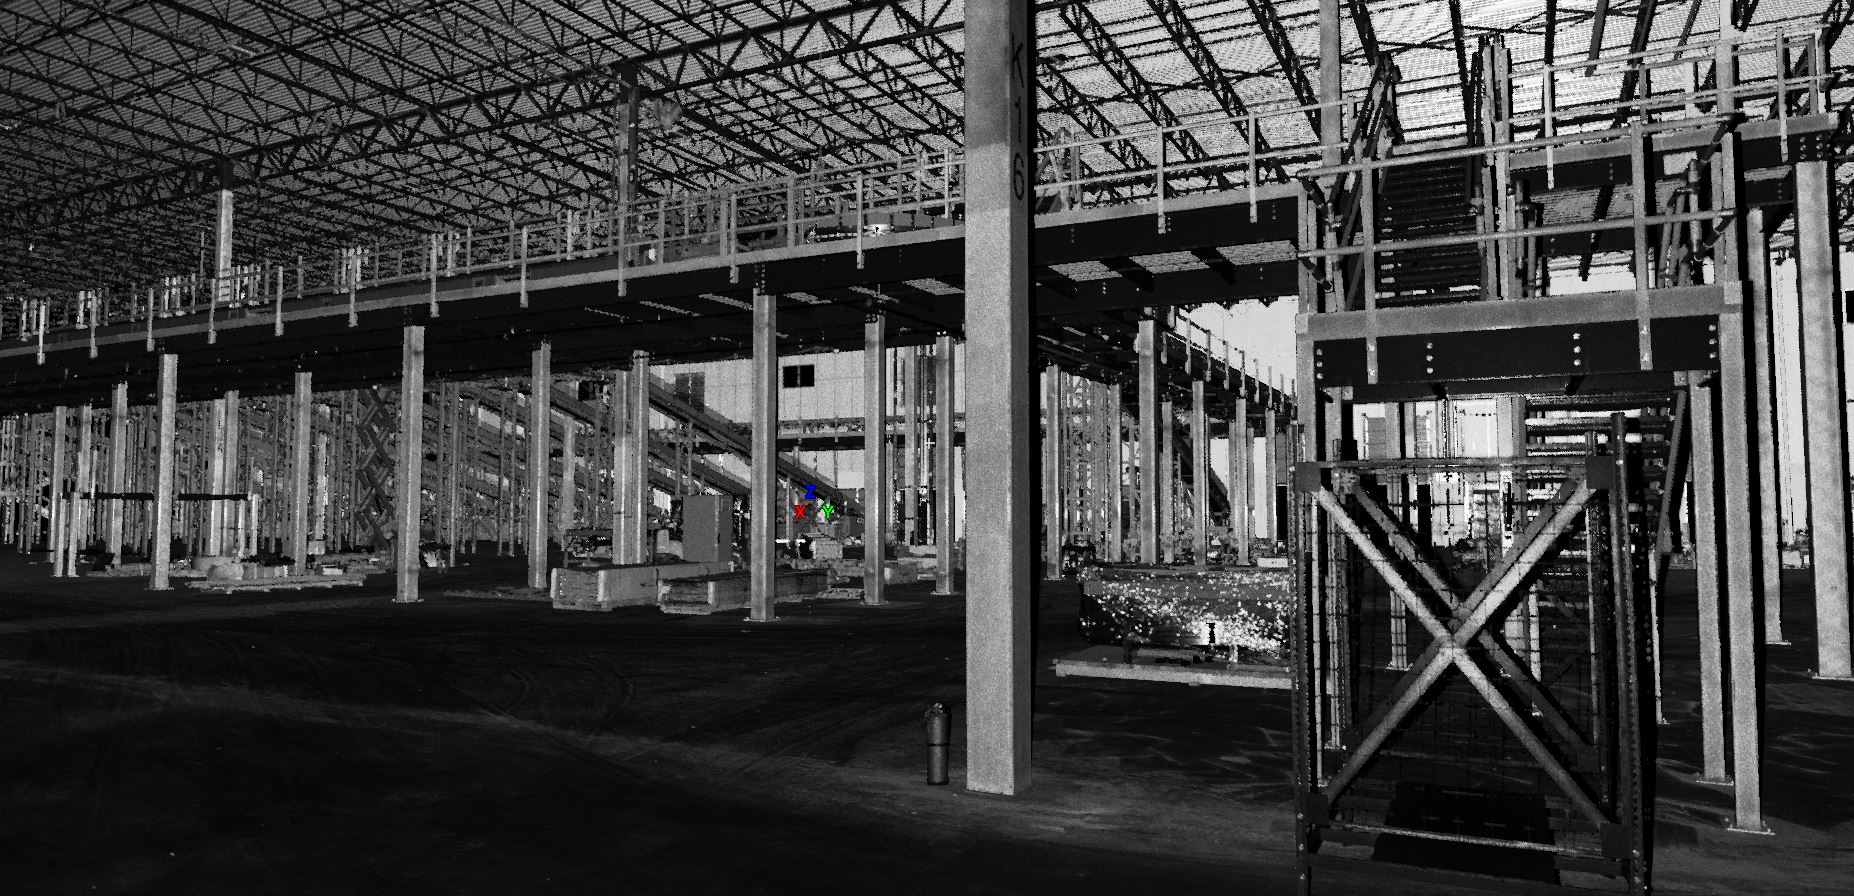 A black and white radar scan interior view of Prologis Riverview West Warehouse.